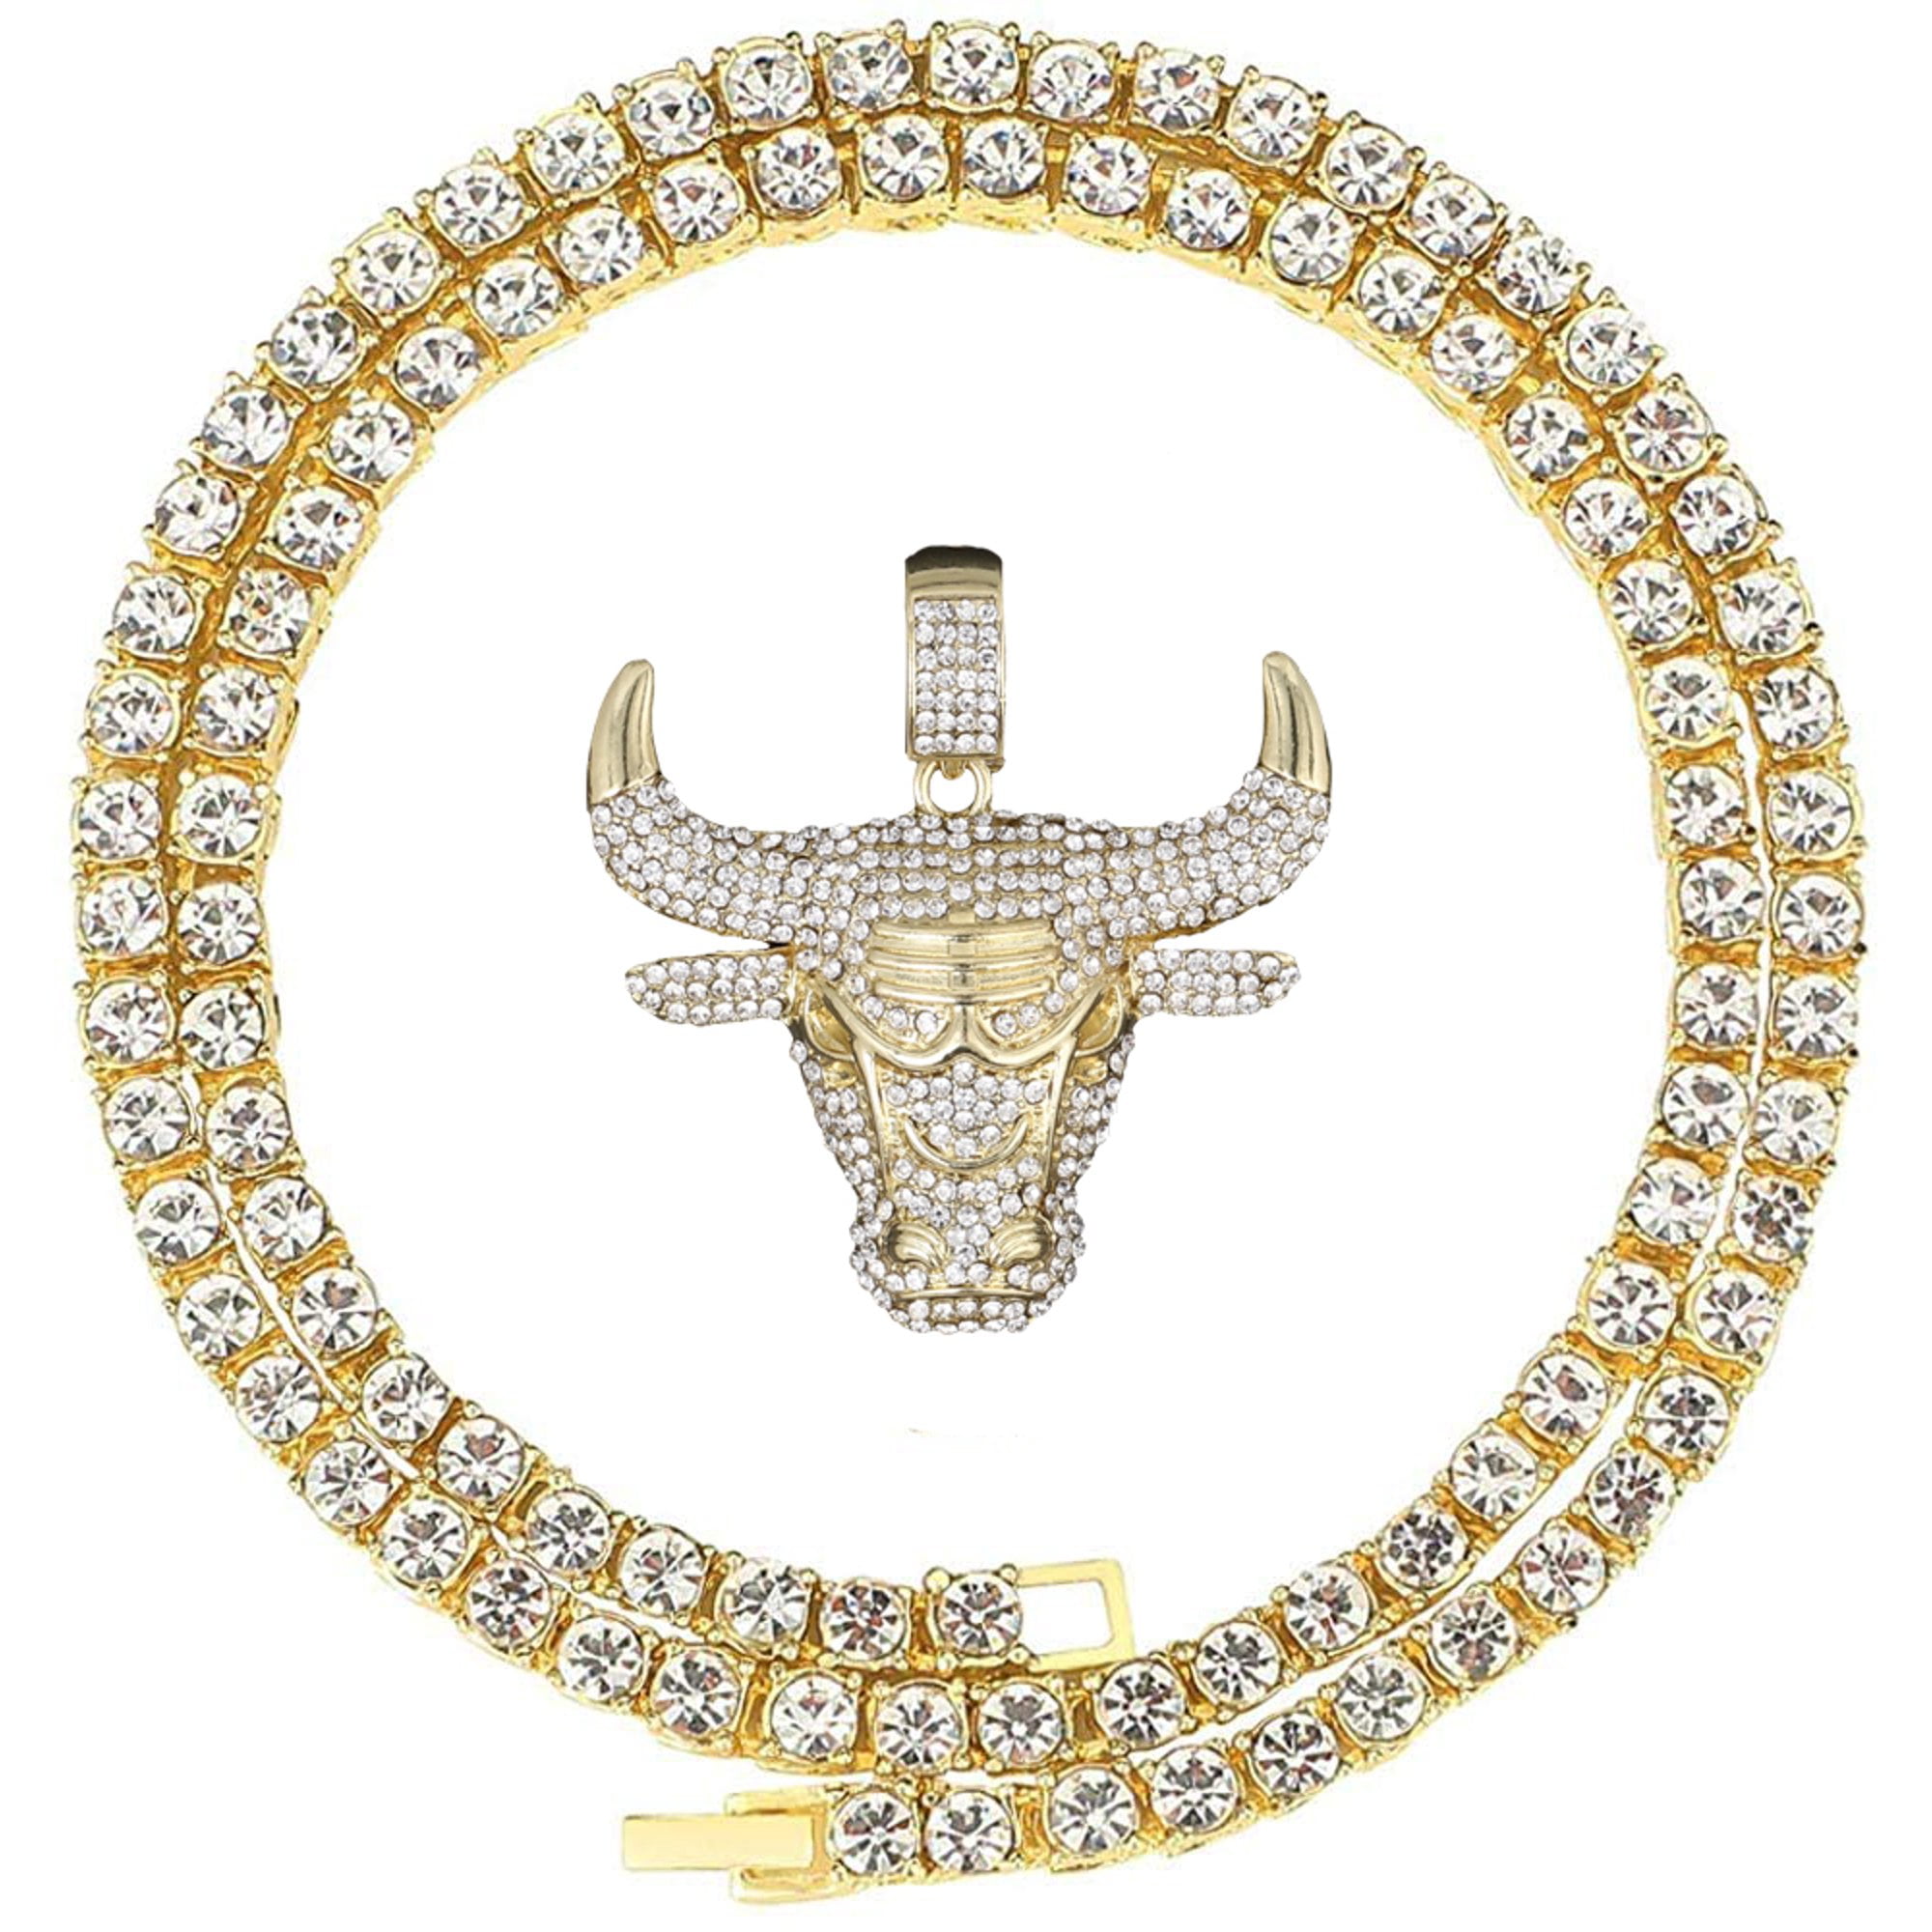 Charles Raymond Iced Out Bull Pendant on Tennis Chain for Men or Women -  Bling'ed Out Hip Hop Jewelry on Blast! - Gold or Silver and Size Your  Choice – TN001 Bull (